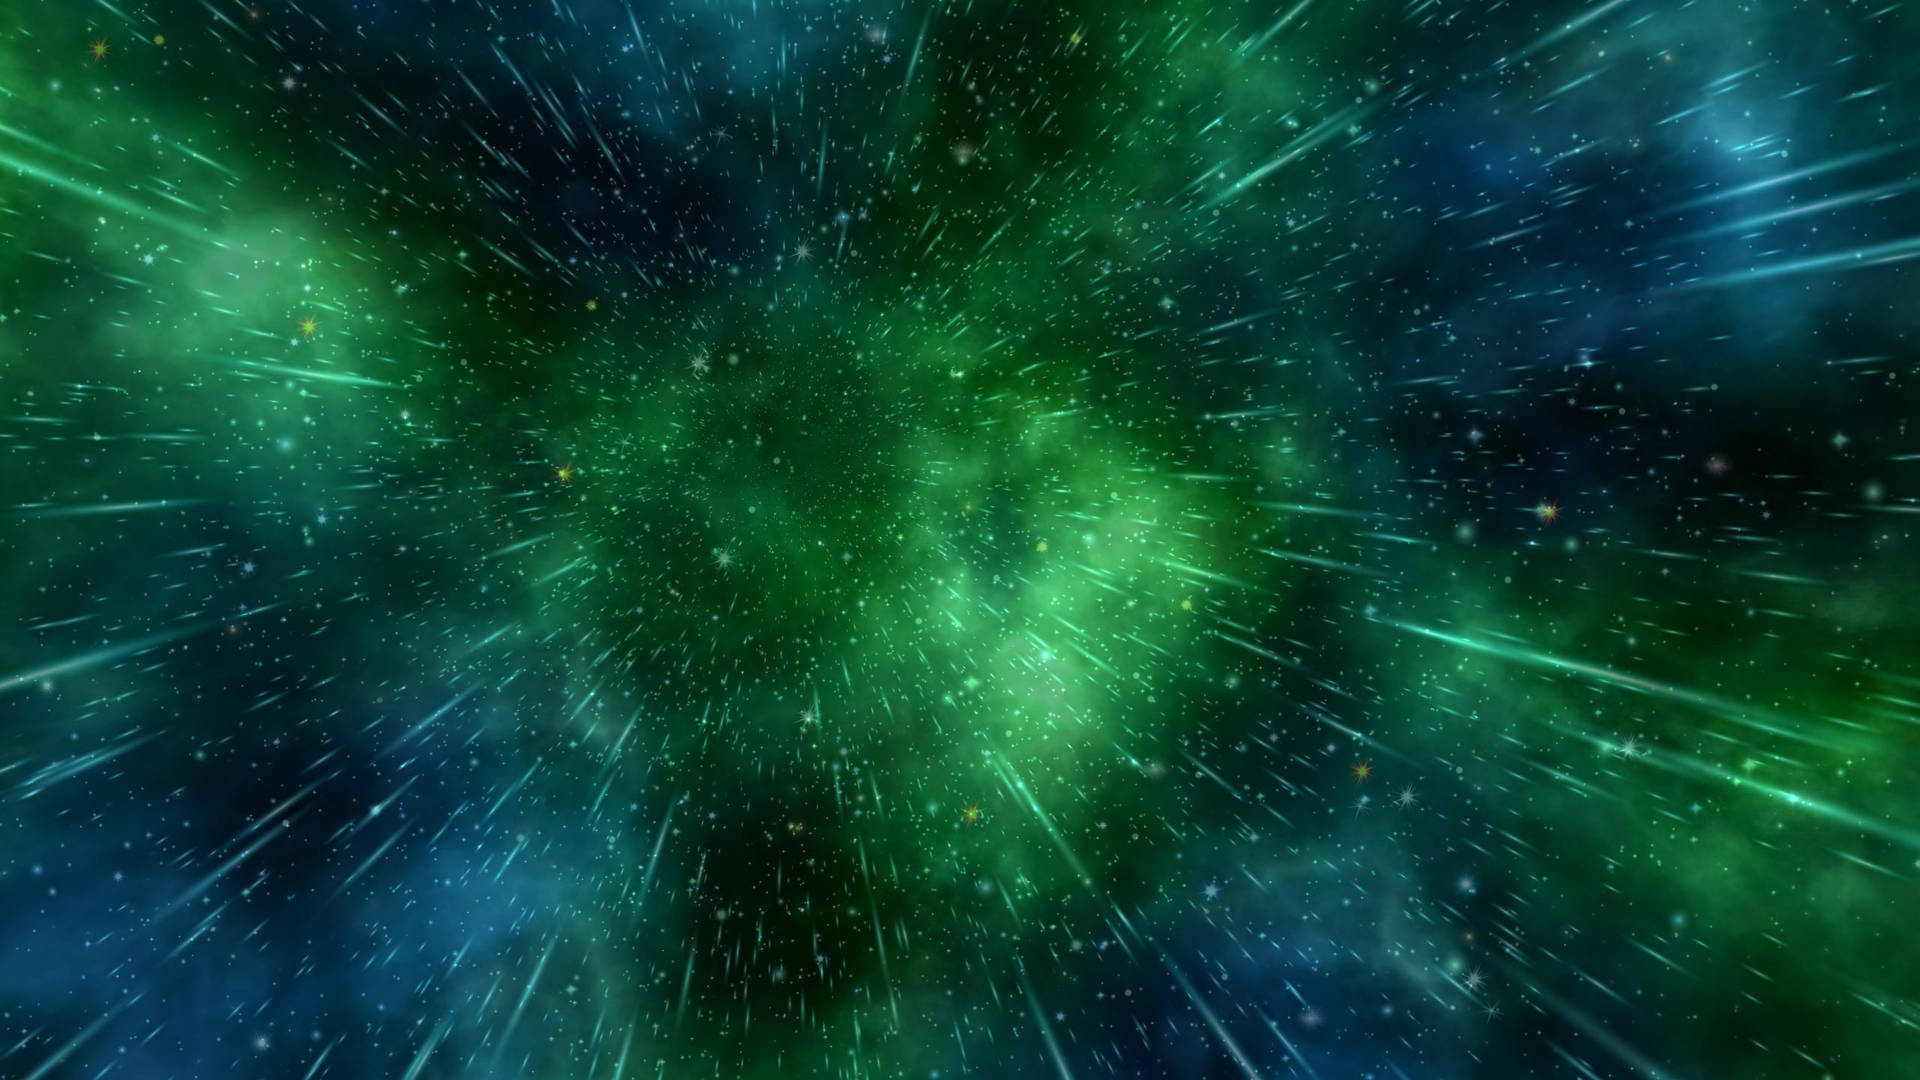 Enjoy The Beauty Of A Mysterious Animated Galaxy Wallpaper